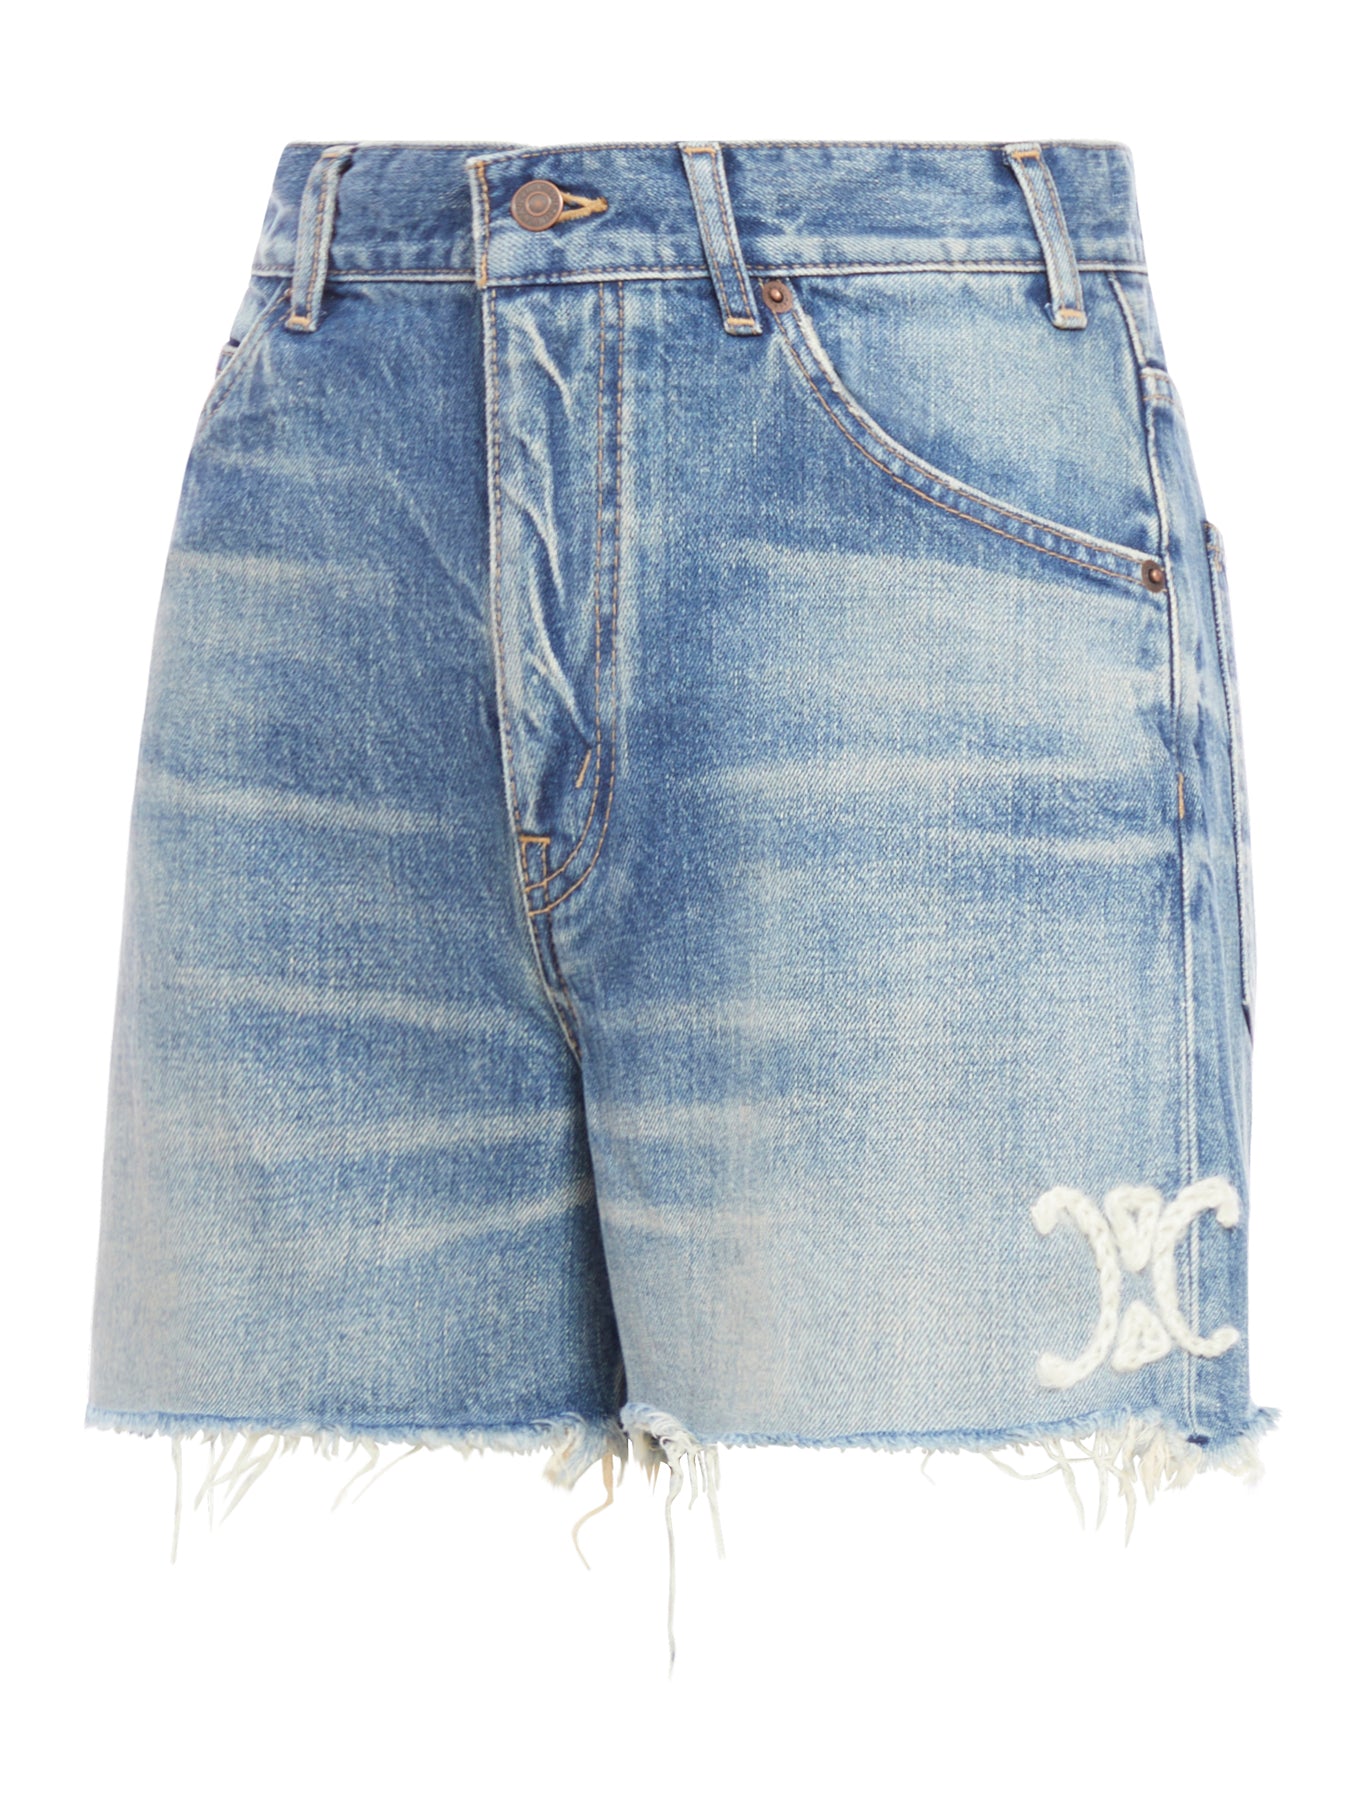 DENIM SKATE SHORTS WITH ELECTRIC SKY WASH ELECTRIC SKY BLUE